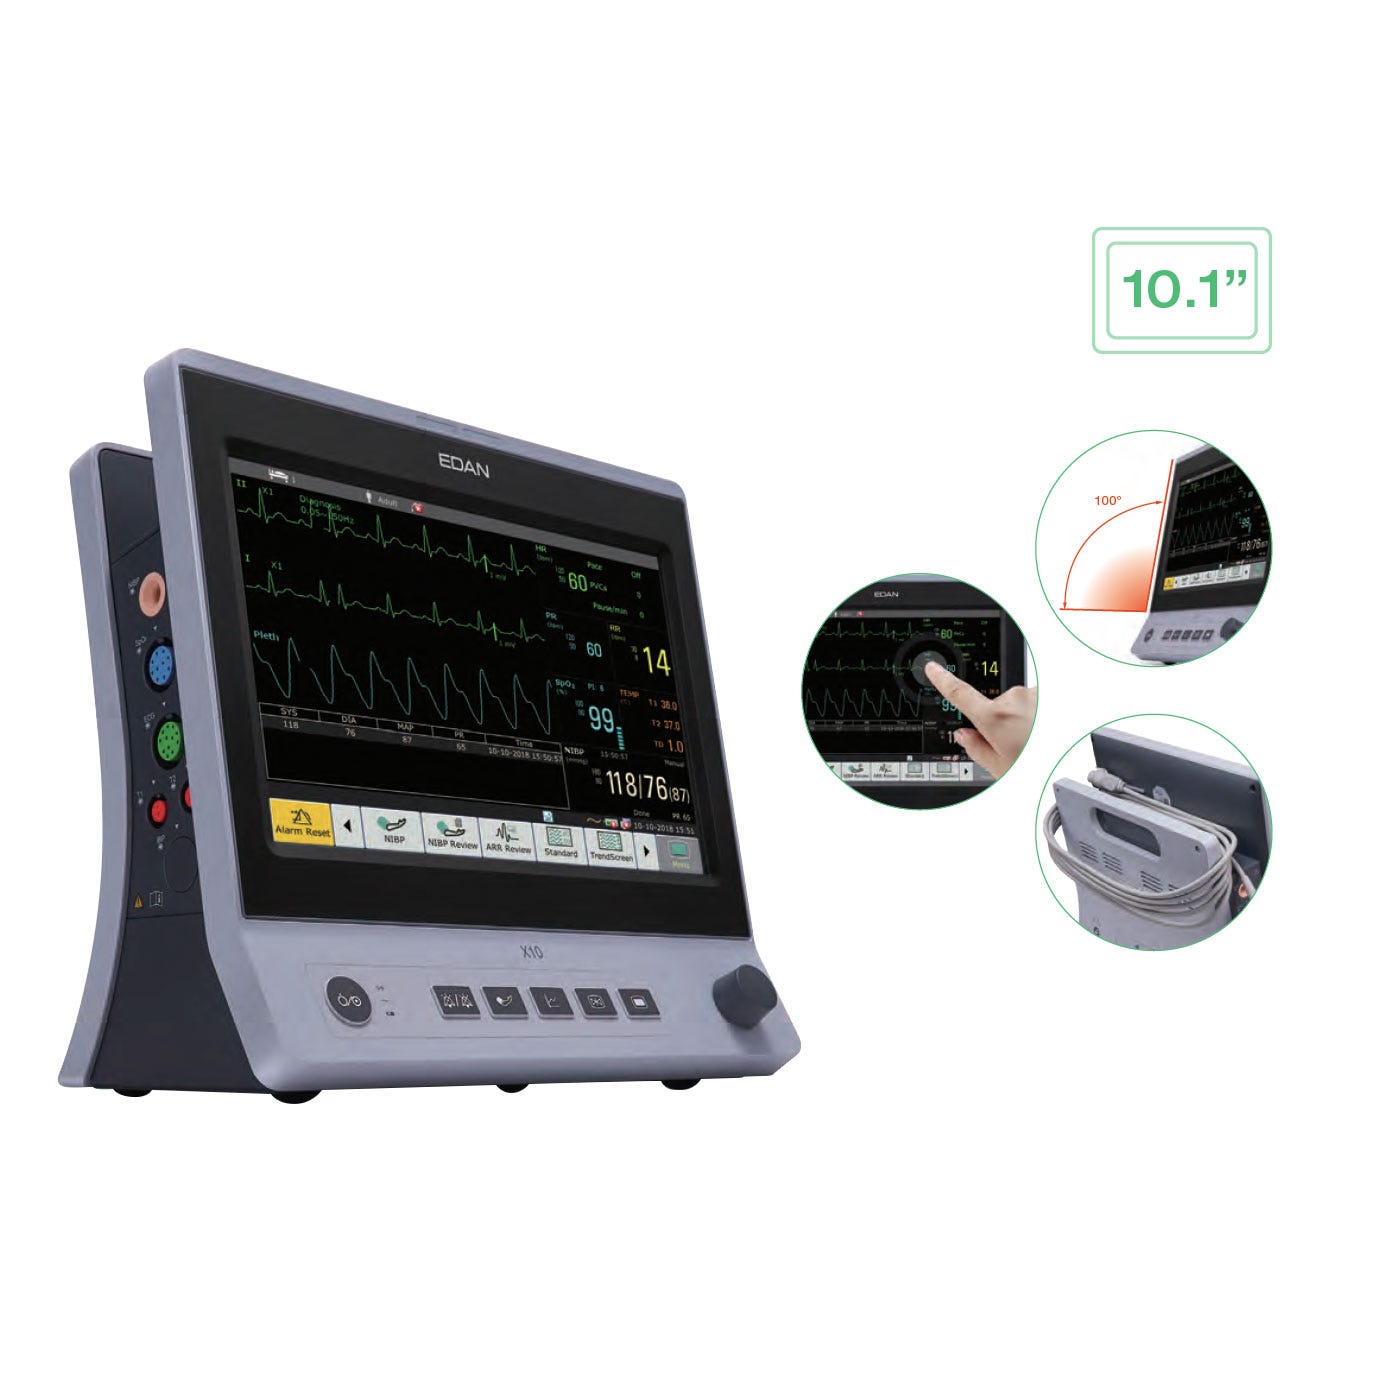 Patient Monitor with 10.1" Touch Screen, ECG, SPO2, NIBP, CO2, Respiratory Rate and Printer